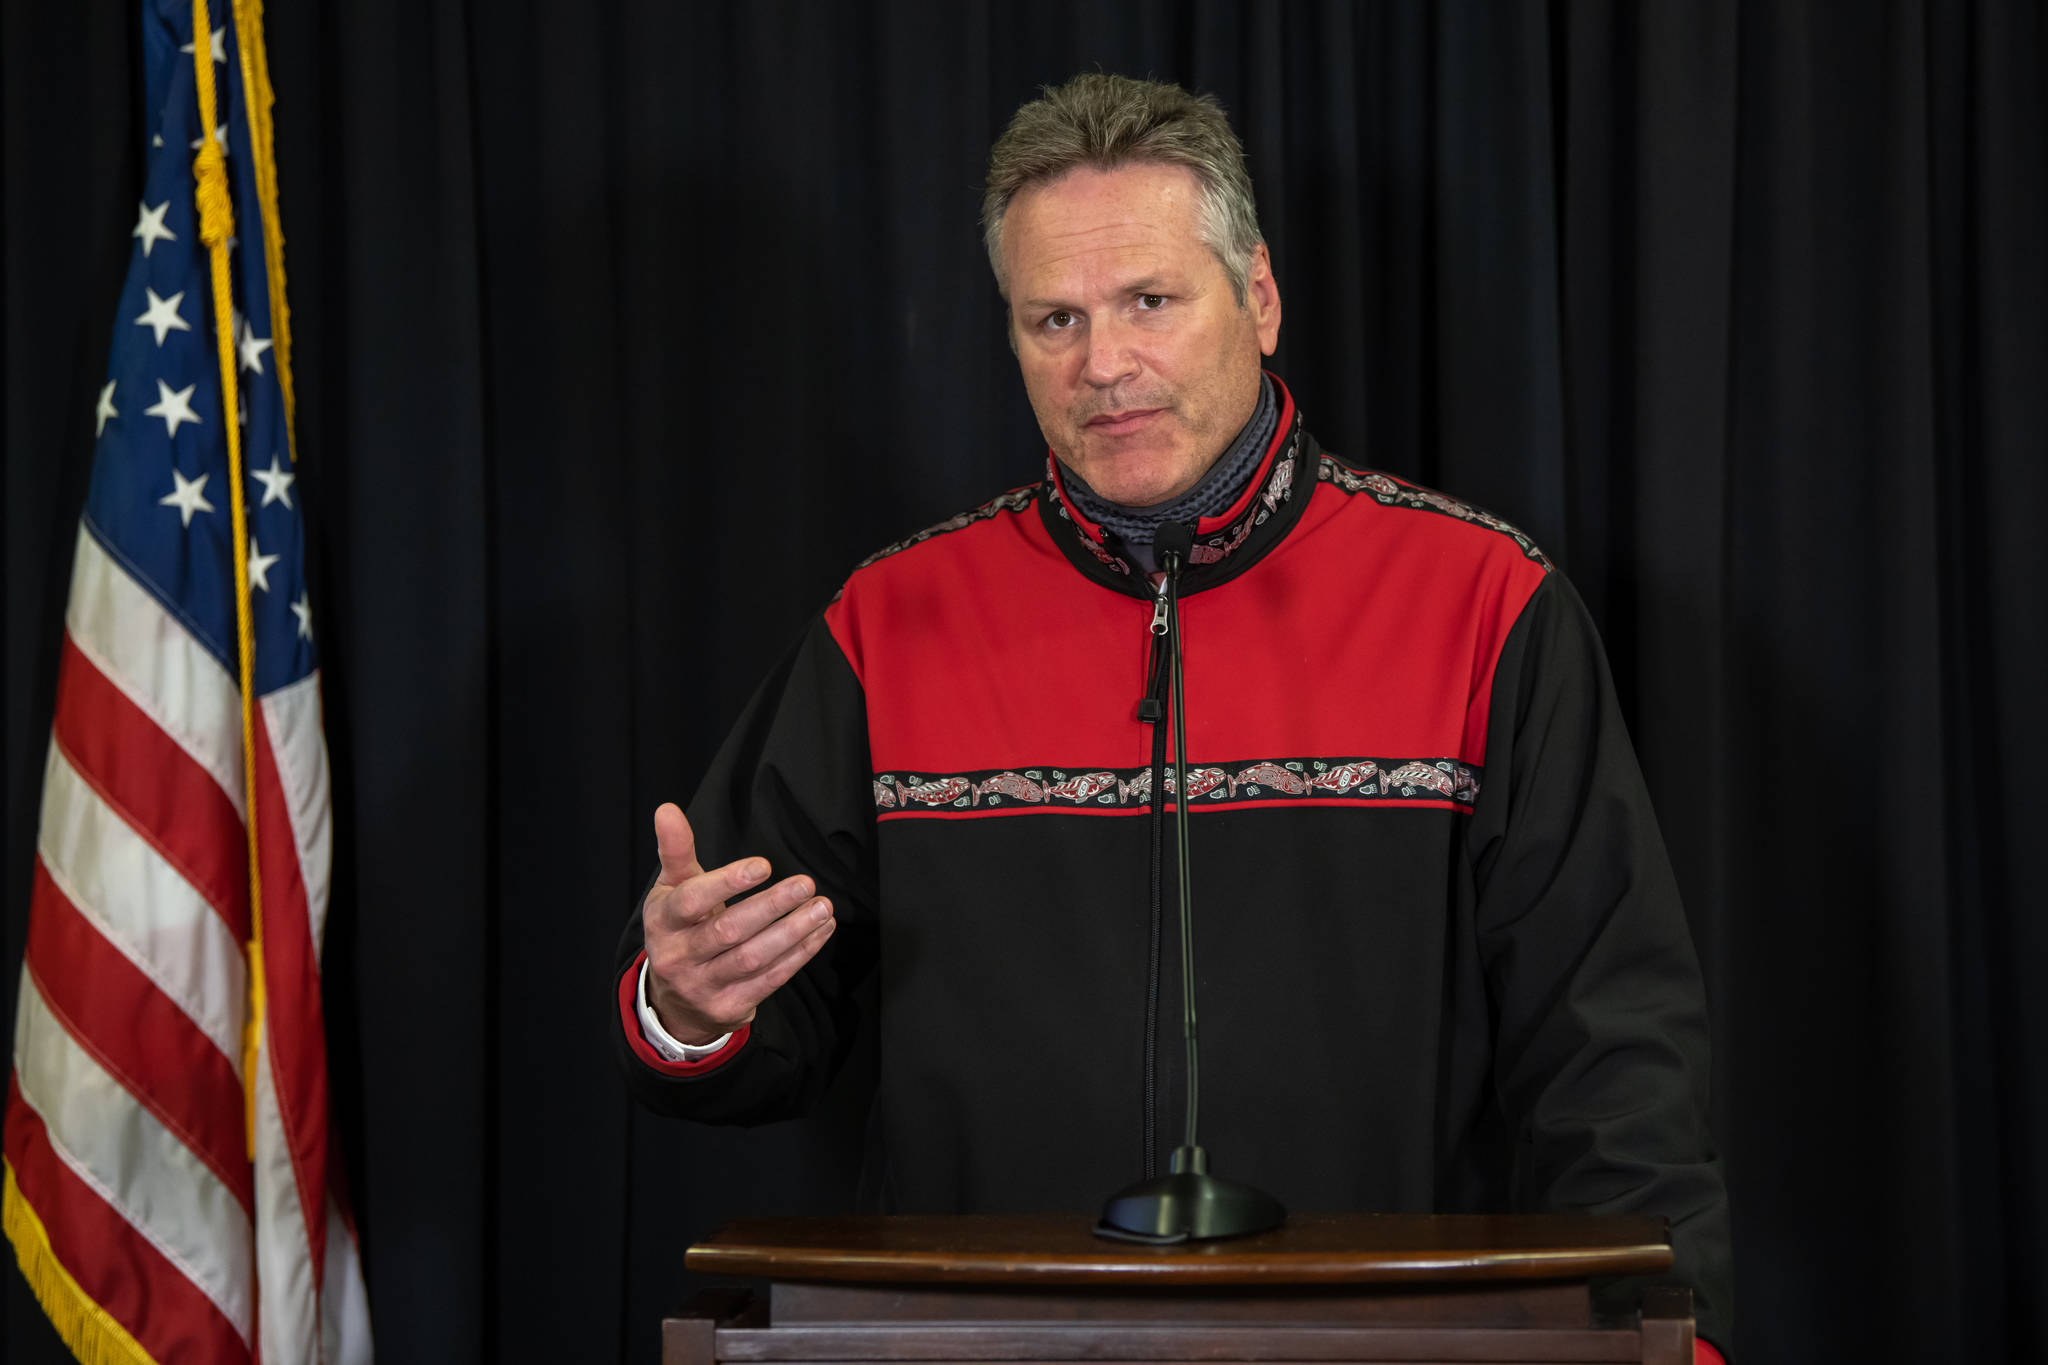 Gov. Mike Dunleavy speaks during an August news conference. On Tuesday, Dunleavy proposed reorganizing the state’s largest department, the Department of Health and Social Services, into two smaller departments. (Courtesy Photo / Office of Gov. Mike Dunleavy)